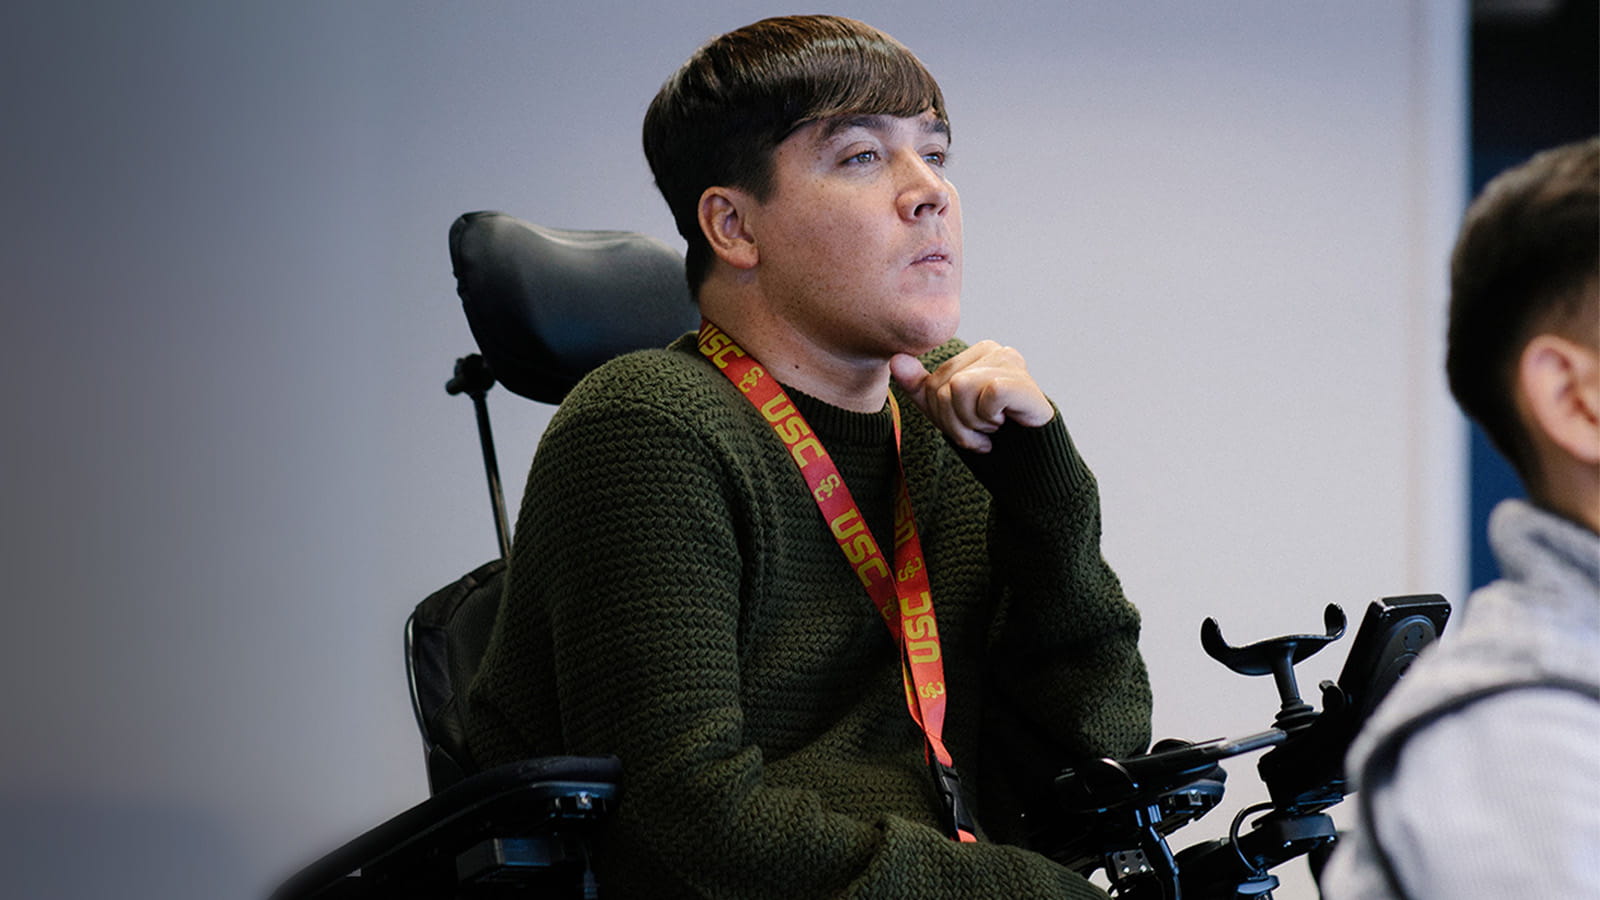 A man with short, dark hair, wearing a green sweater and jeans and sitting in a wheelchair, listens to a presentation in a conference room.